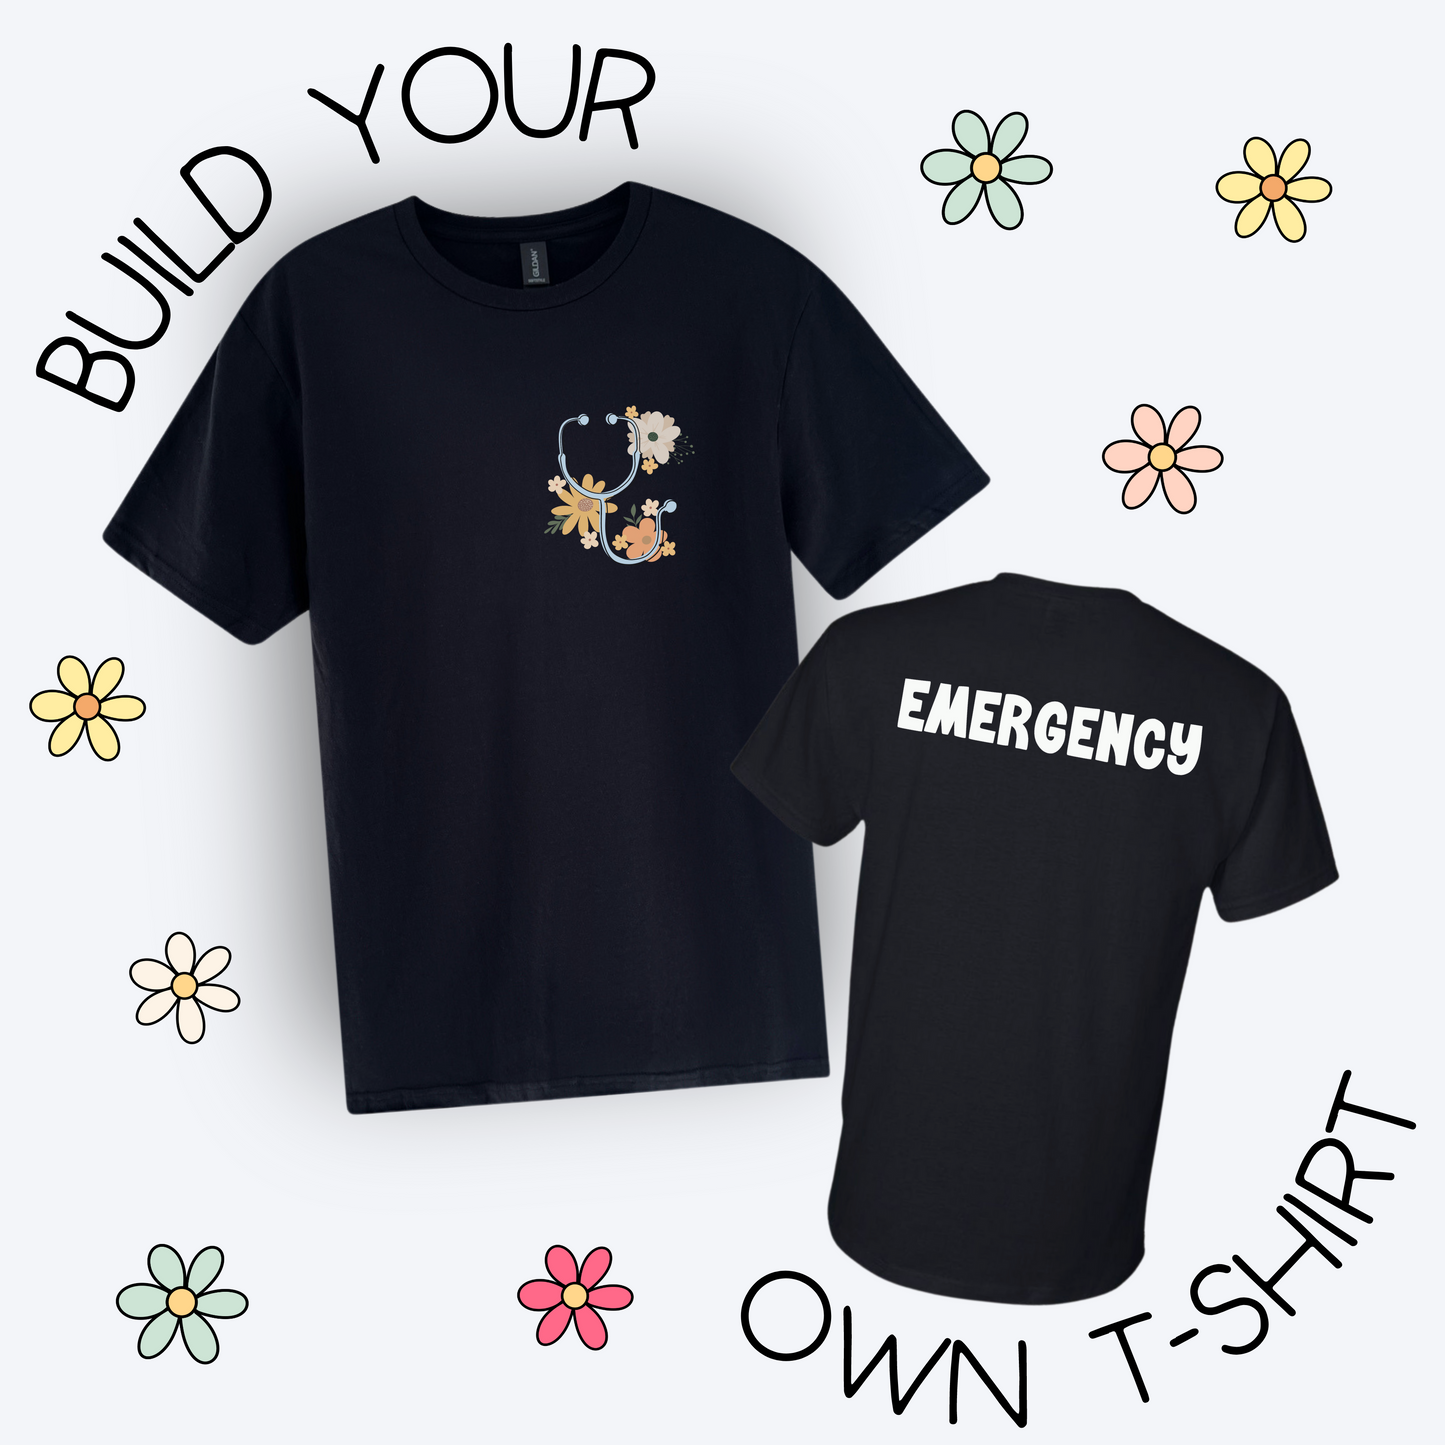 Build Your Own T-Shirt